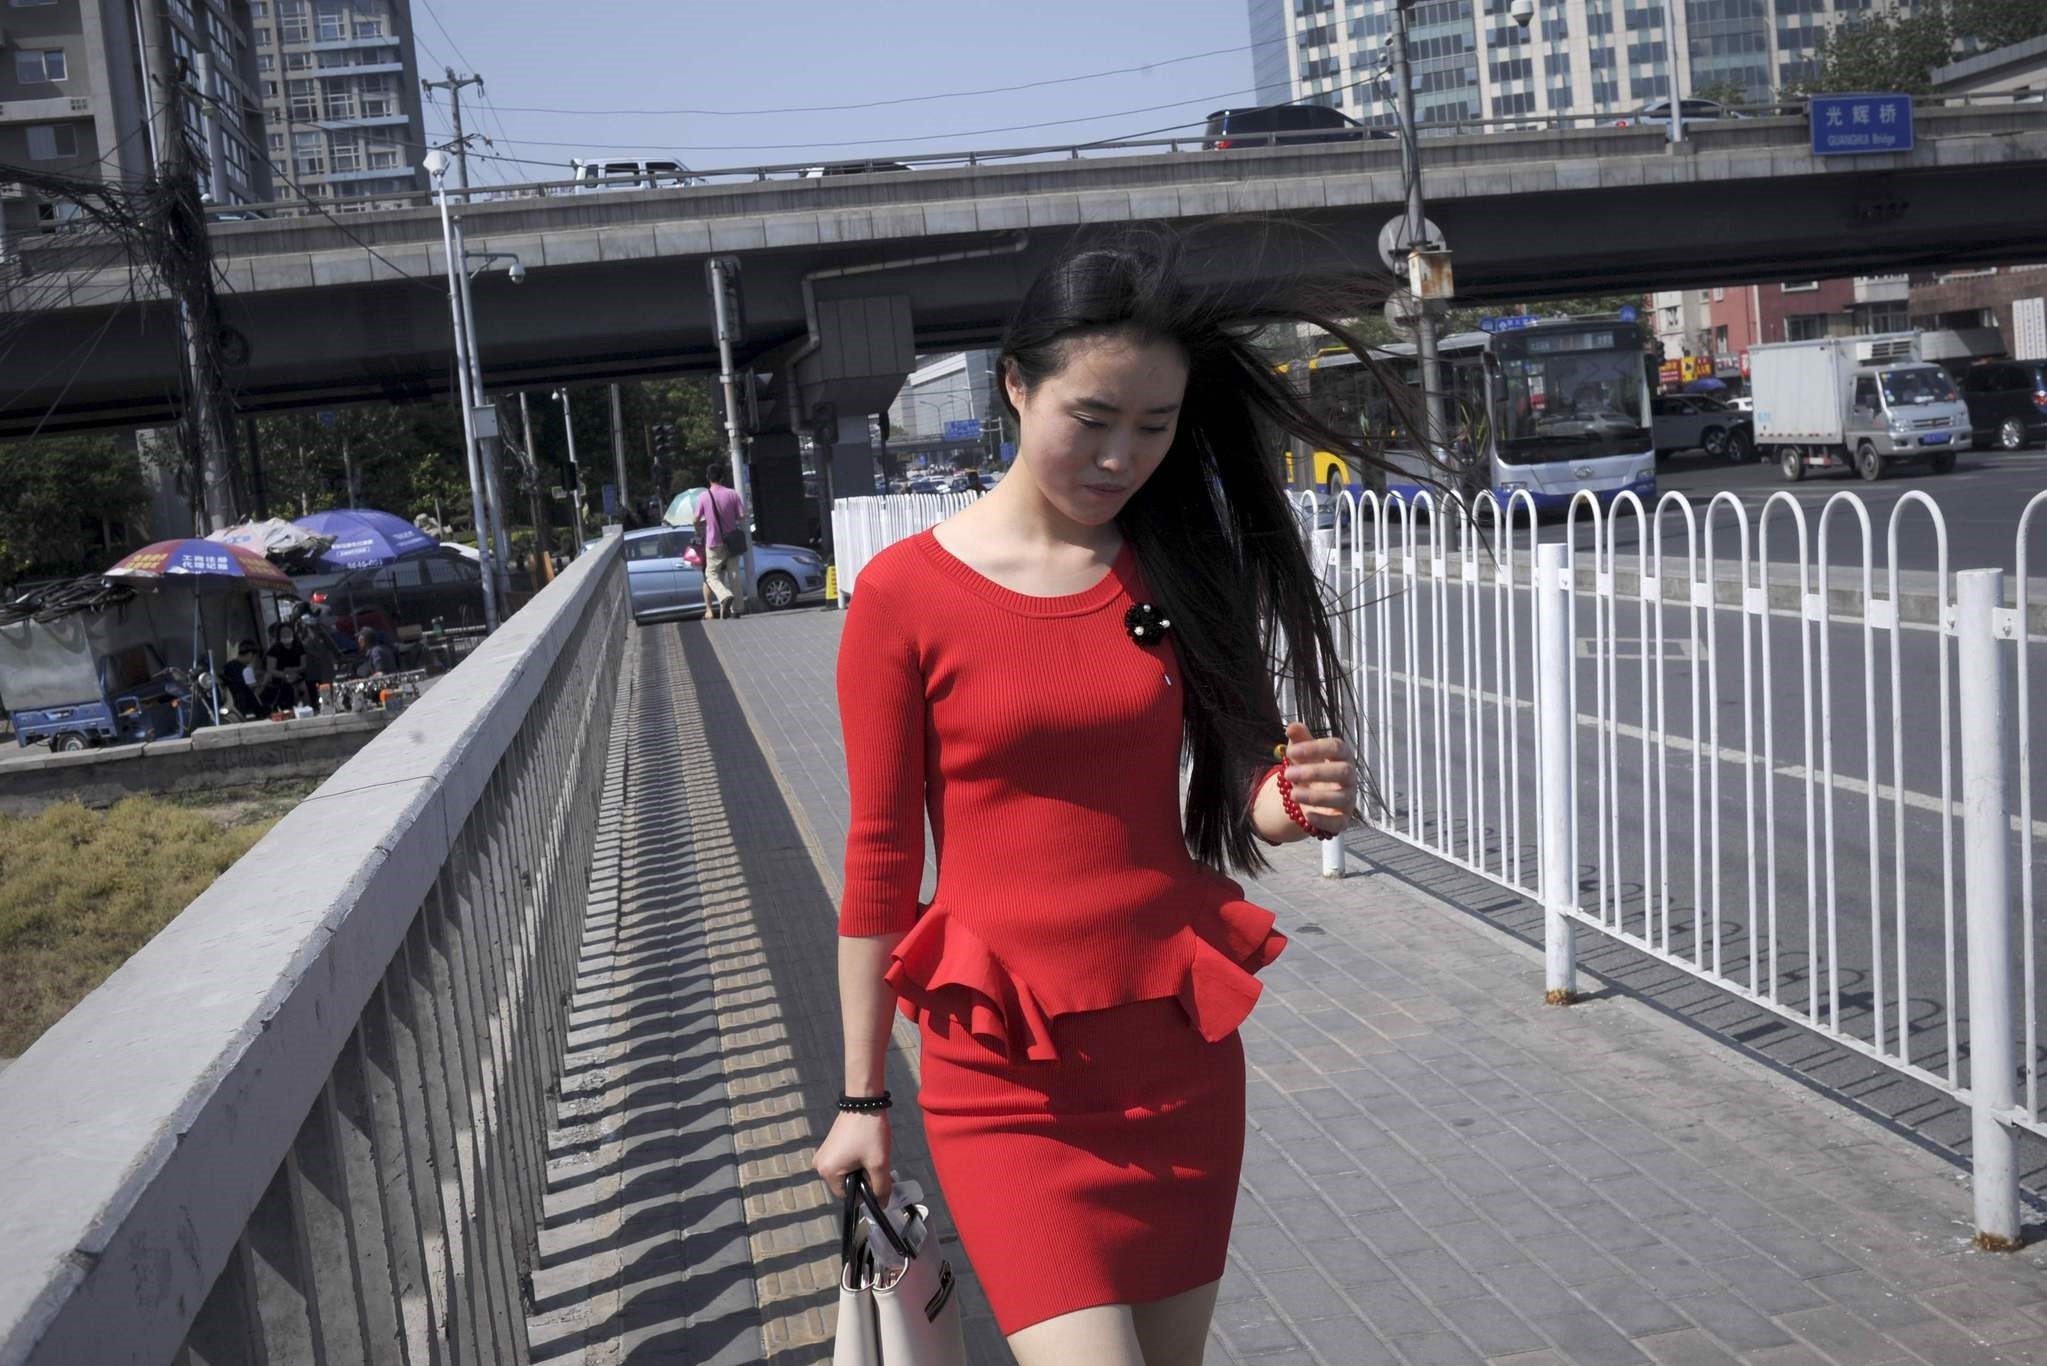 A woman walks on a bridge near central Beijing on May 17, 2016. (AFP Photo)